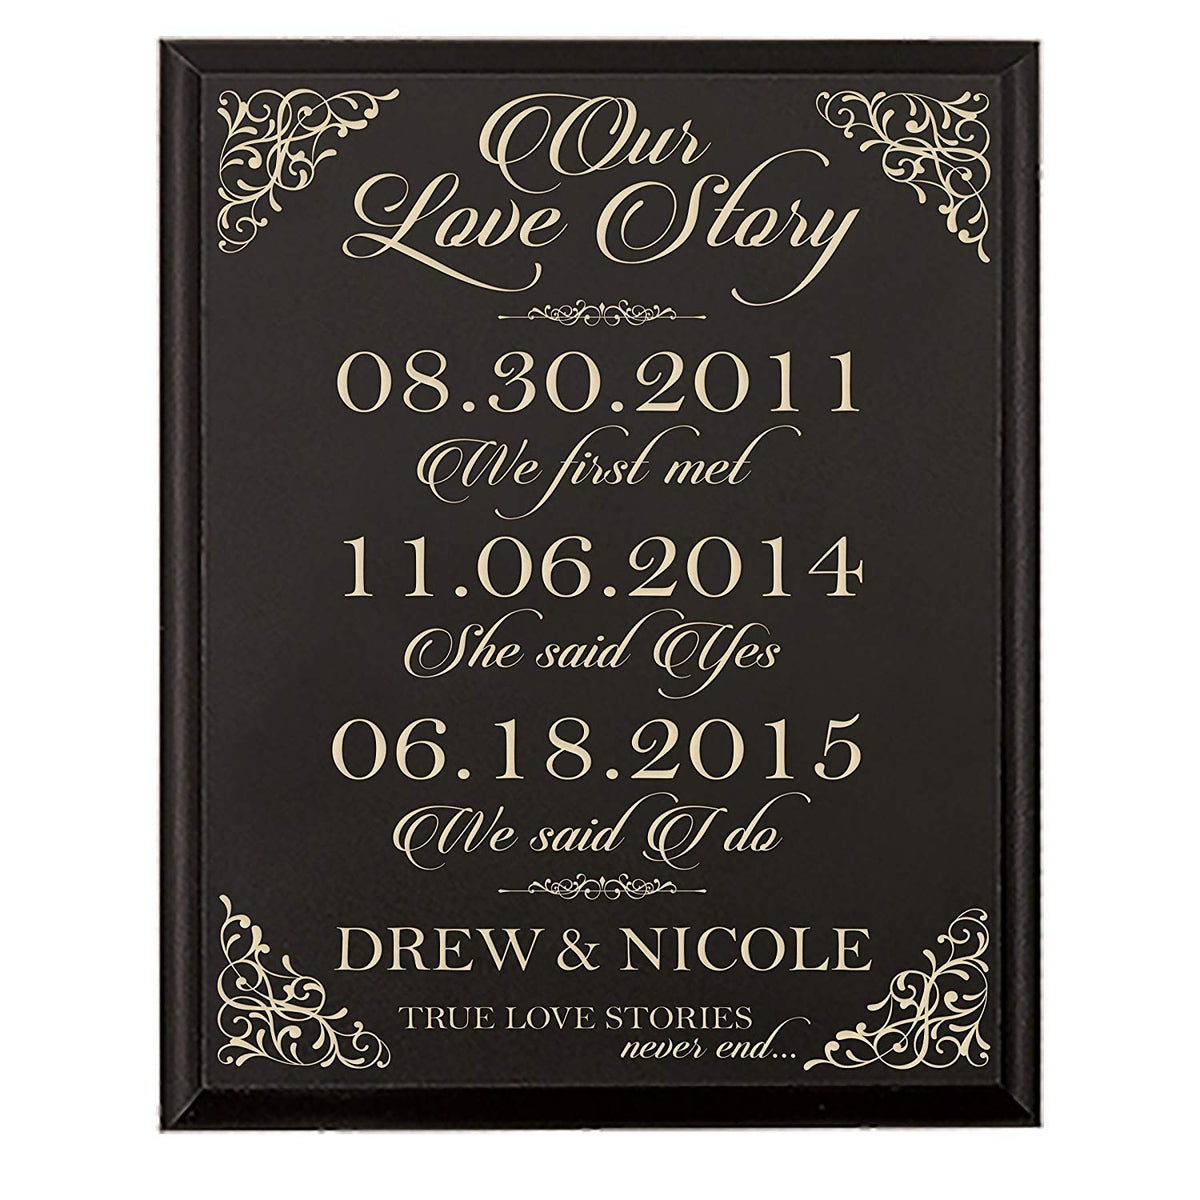 Personalized Wedding Anniversary Wall Plaque - Our Love Story - LifeSong Milestones